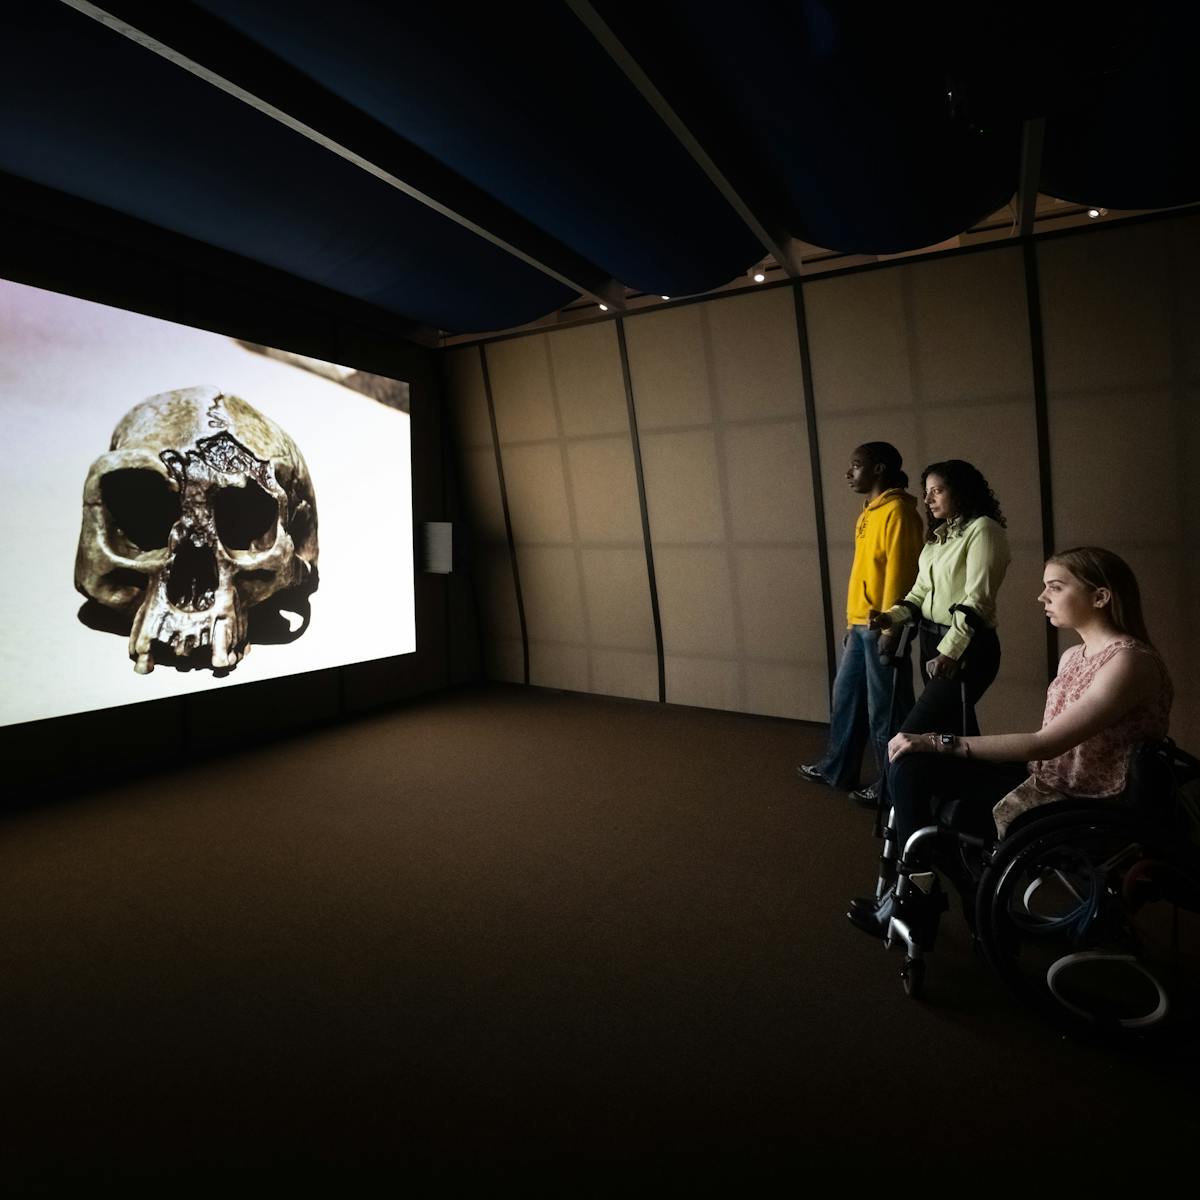 Photograph of a dark exhibition space featuring a projected video on a large screen. The walls of the room slope inwards and are criss-cross of black wooden battens on grey fabric. The ceiling is a blue cloth draped over several cross joists. To the left the video shows a computer generated image of a sandy shoreline on which a large human skull sits, bathed in sunlight. To the right 3 visitors watch the film. Closest to the camera is a young woman seated in a wheelchair, her hand resting on her knee. Stood next to her is a woman in a green shirt who is using crutches. At the far end stands an individual in a yellow hooded top and blue jeans. 